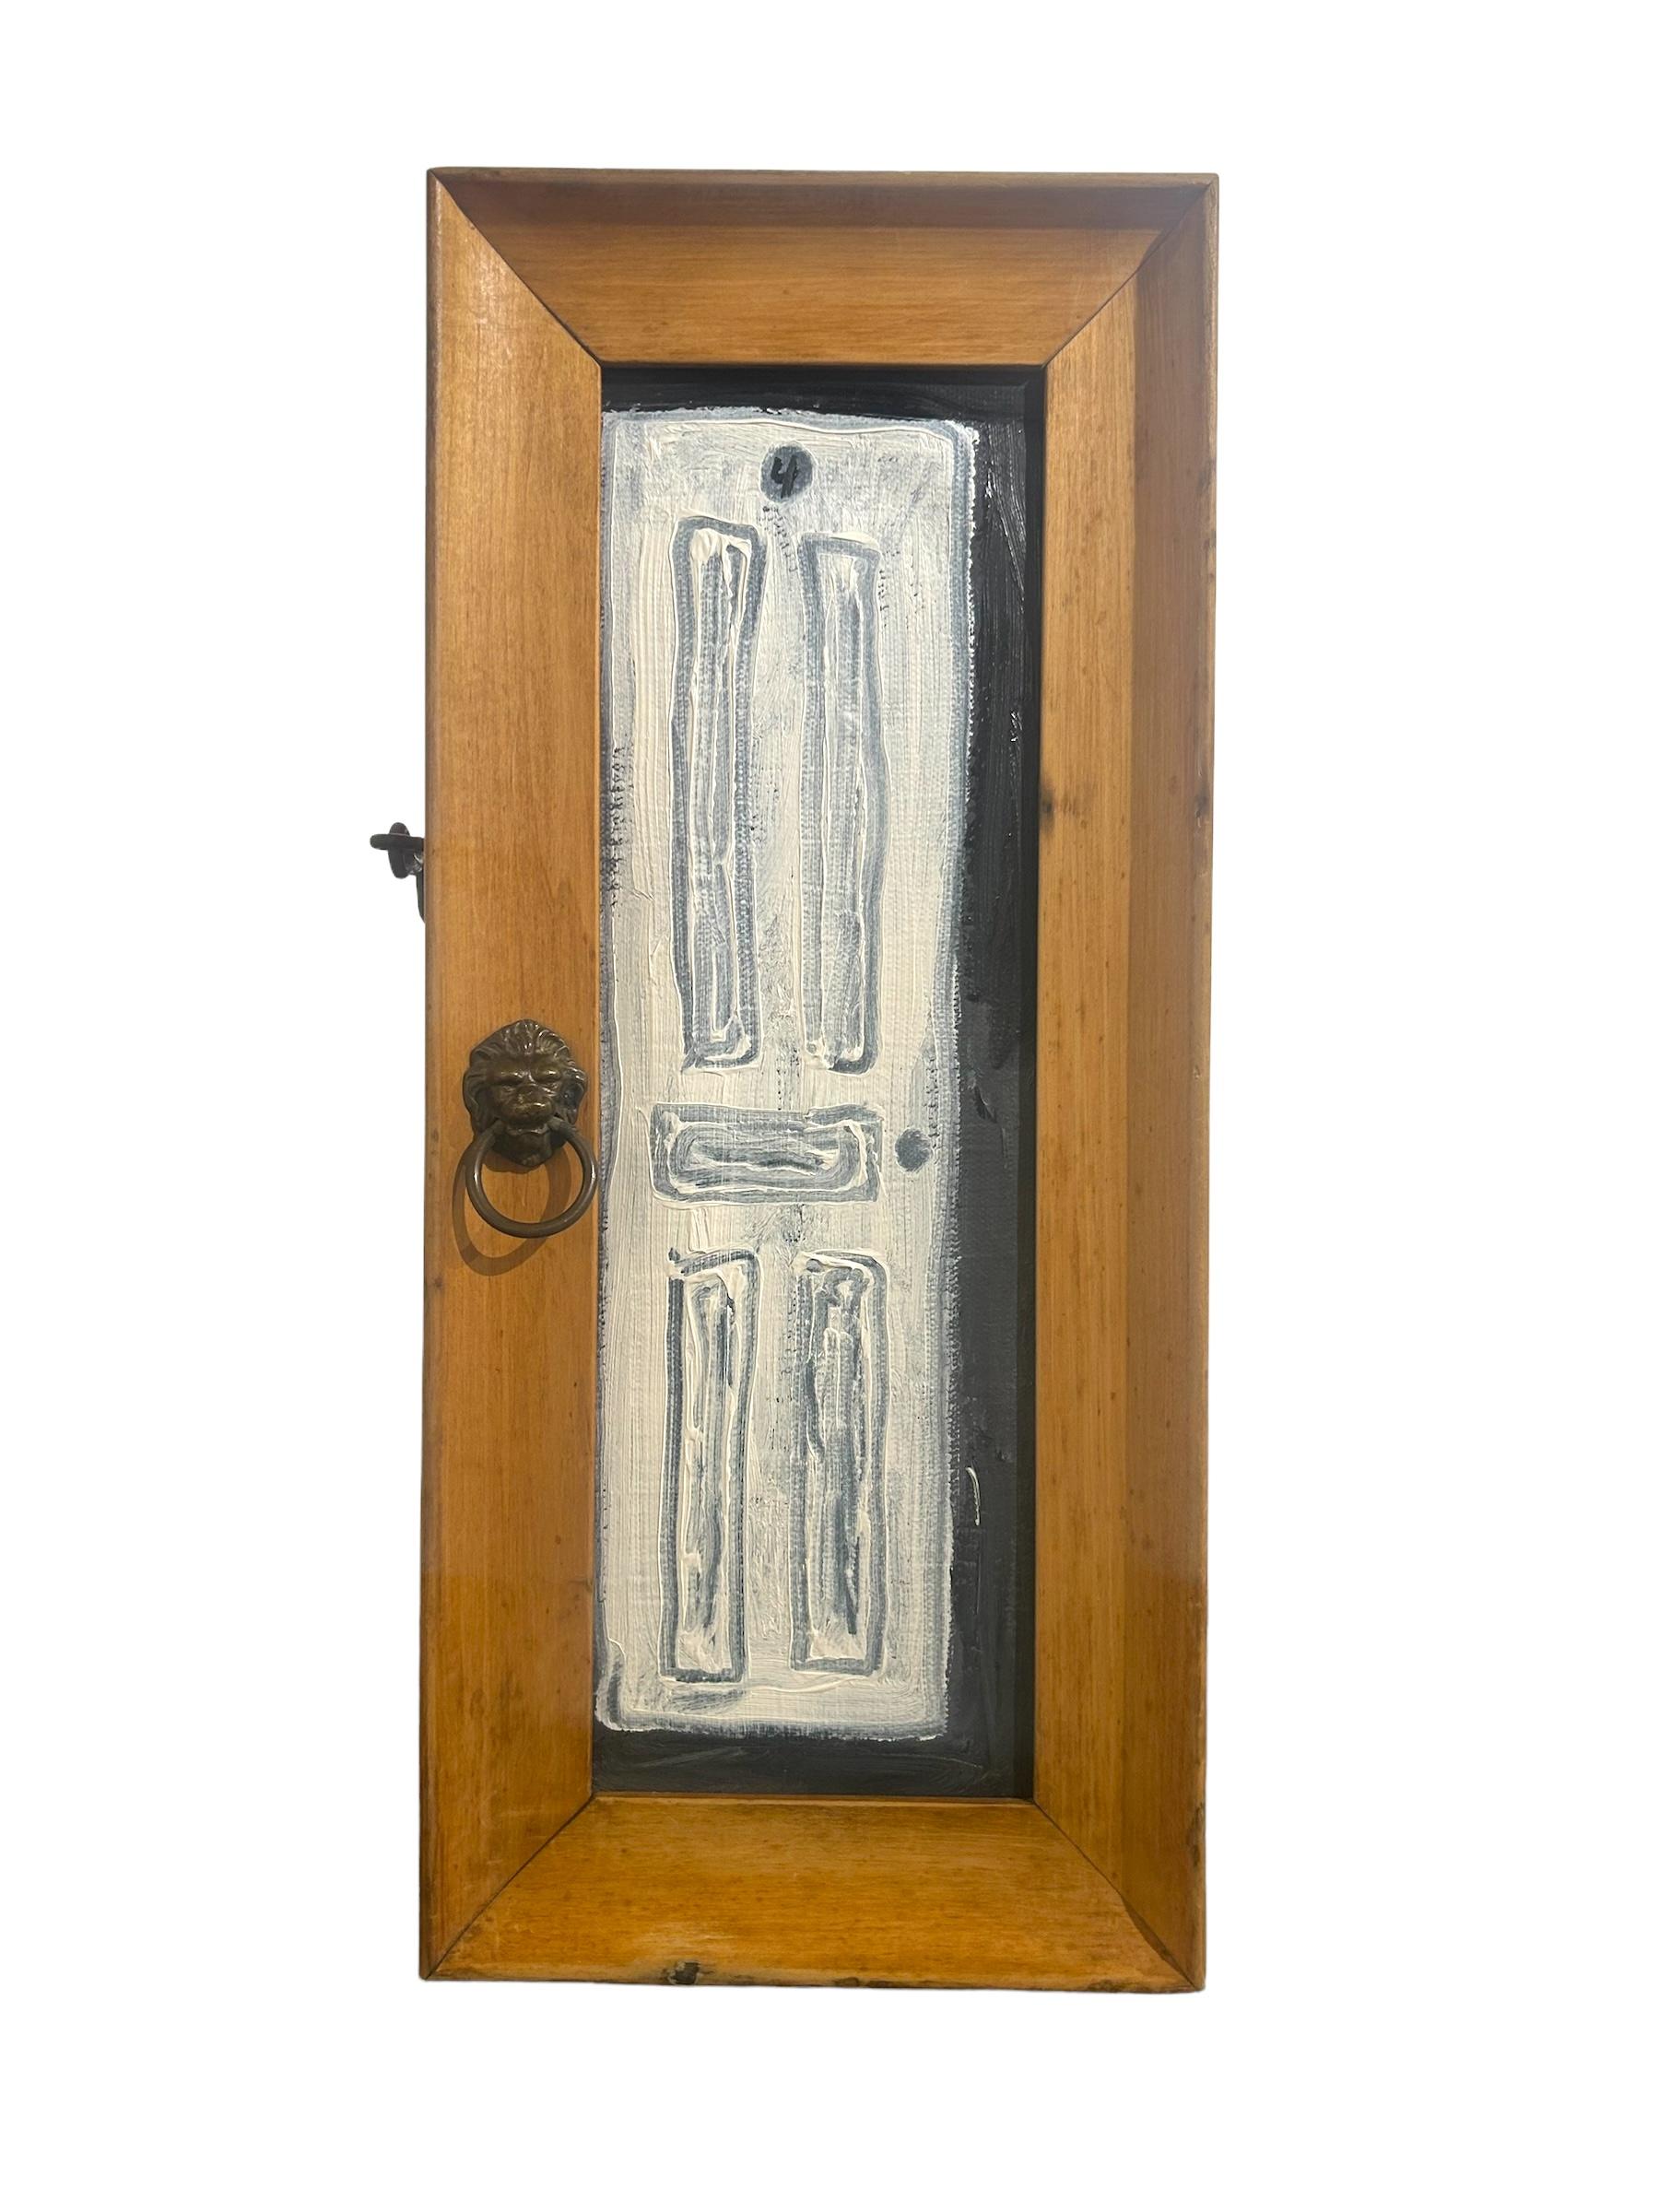 American Don't You Dare - Multi-Panel Folding Door Painting, Objet D'art  For Sale